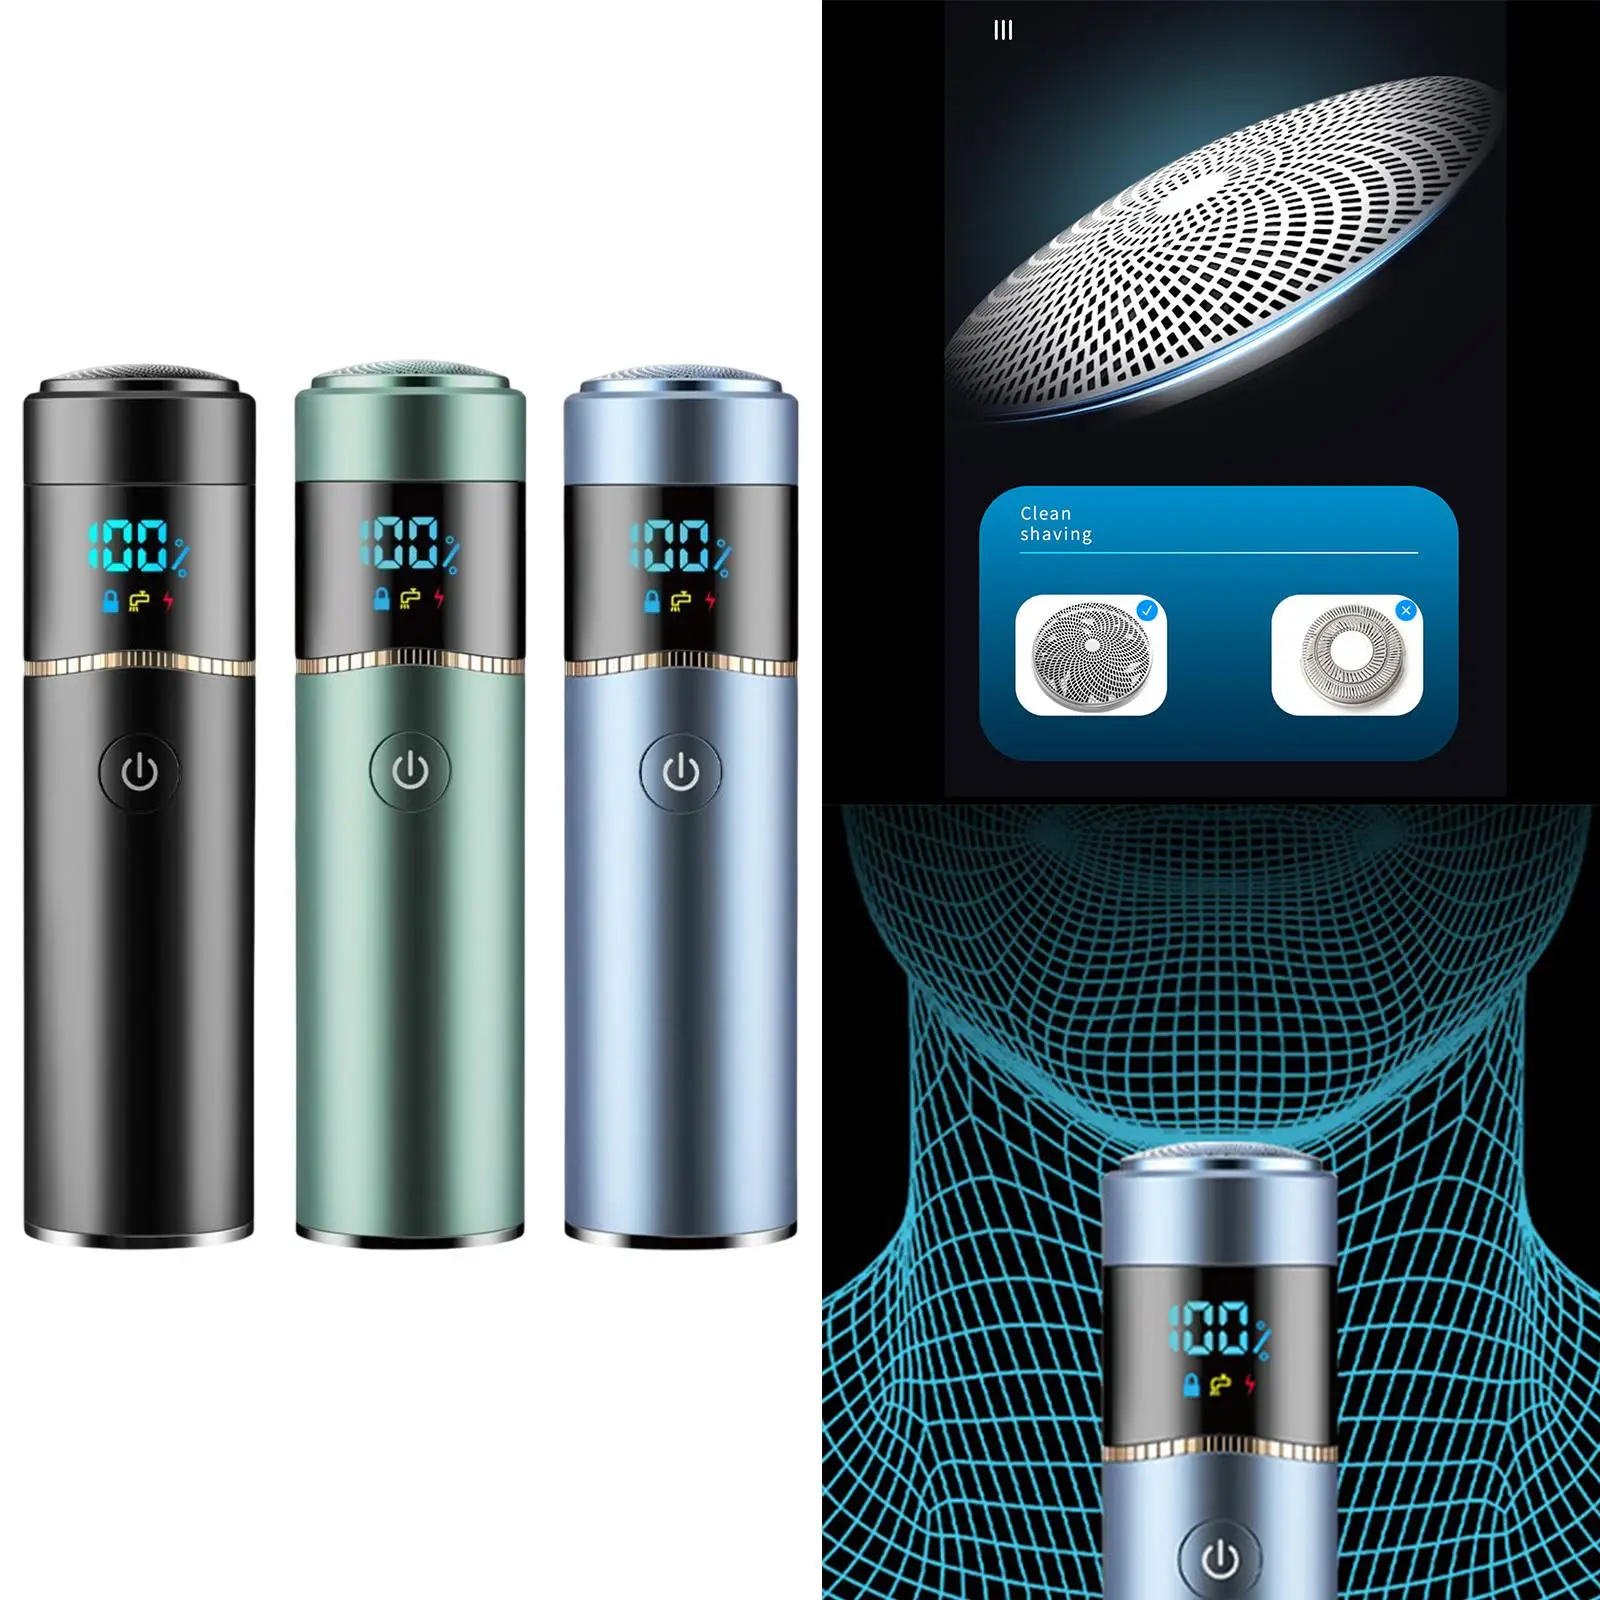 Mini Electric Shaver Washable Rechargeable LED Display with Smart Travel Lock Efficient Type C Charging Port Compact Size Safe